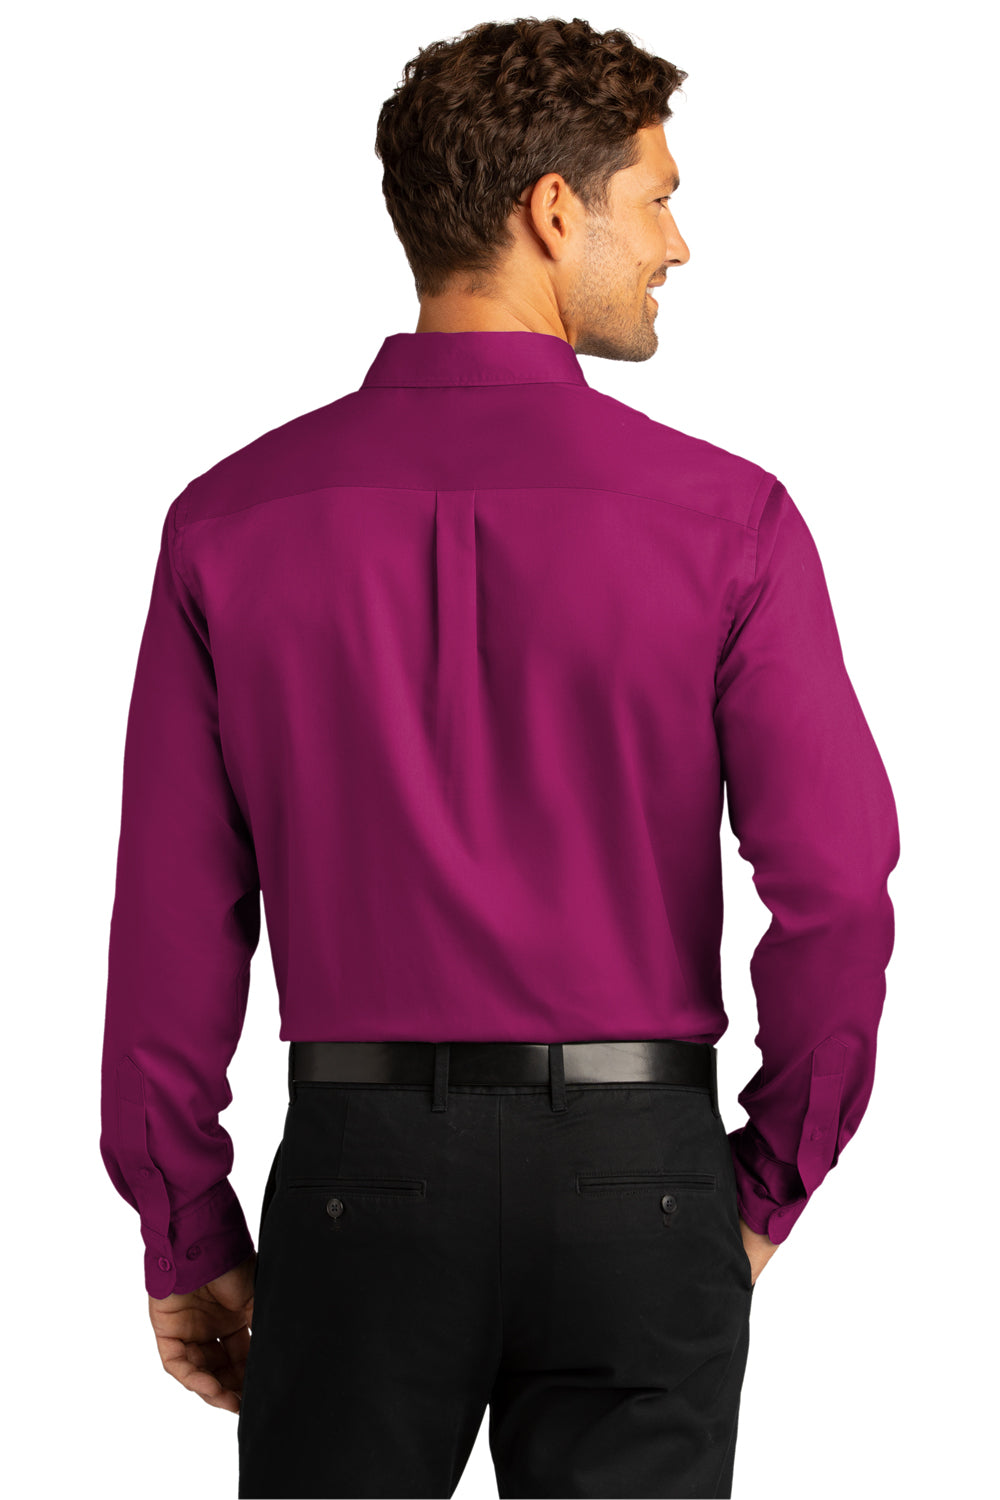 Port Authority Mens SuperPro Wrinkle Resistant React Long Sleeve Button Down Shirt w/ Pocket Wild Berry Side